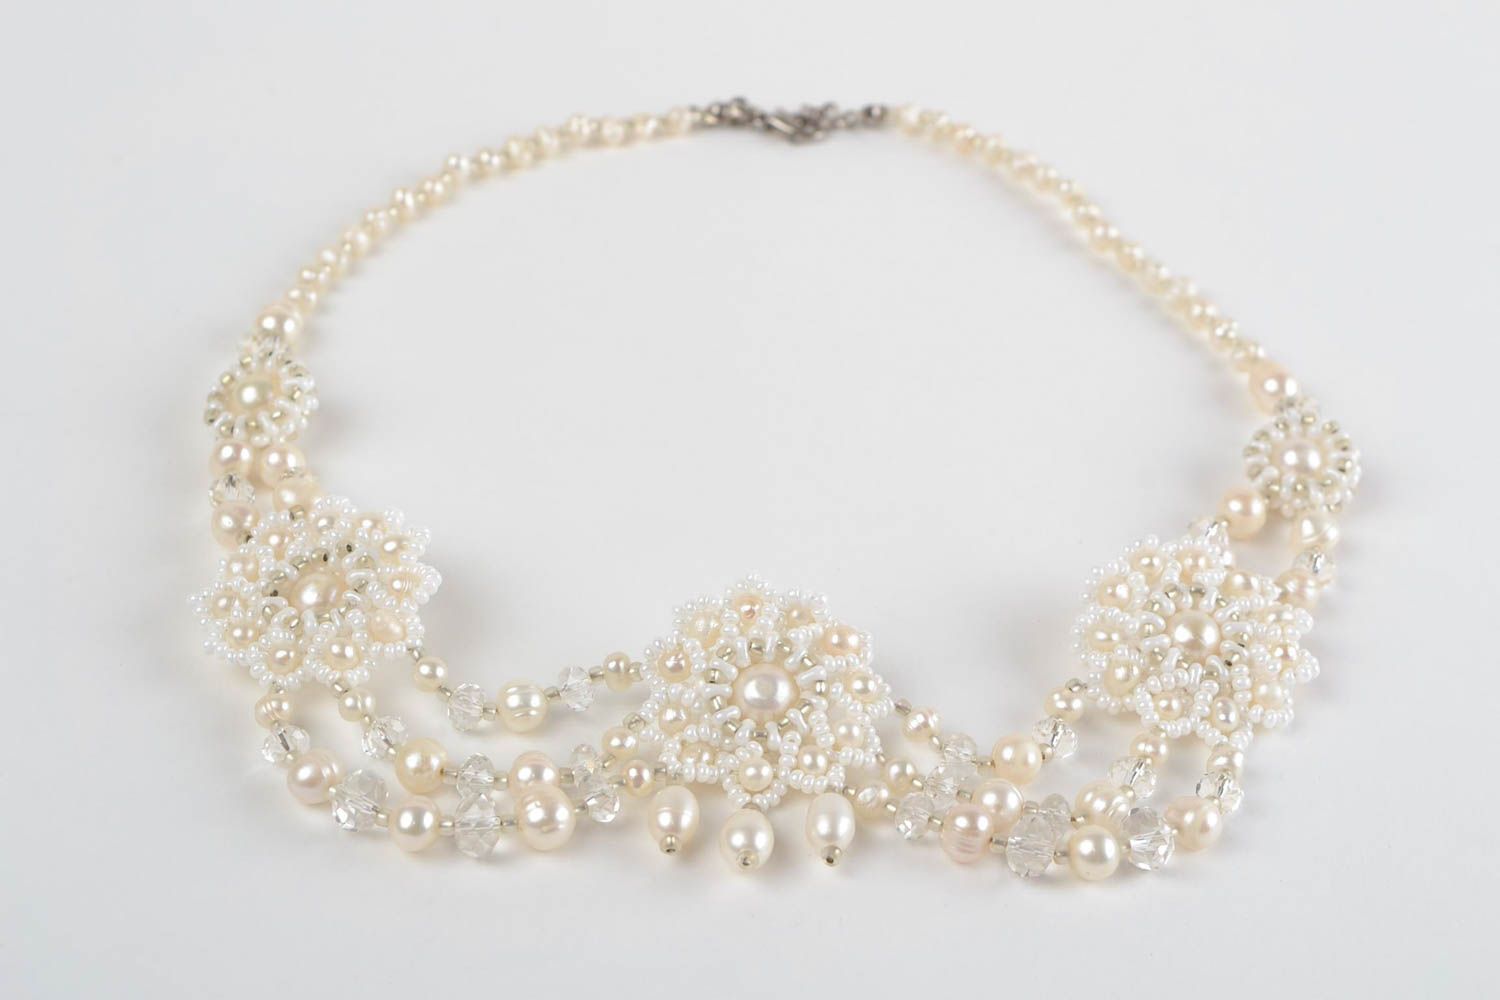 Beautiful festive handmade white necklace made of beads and natural stones photo 5